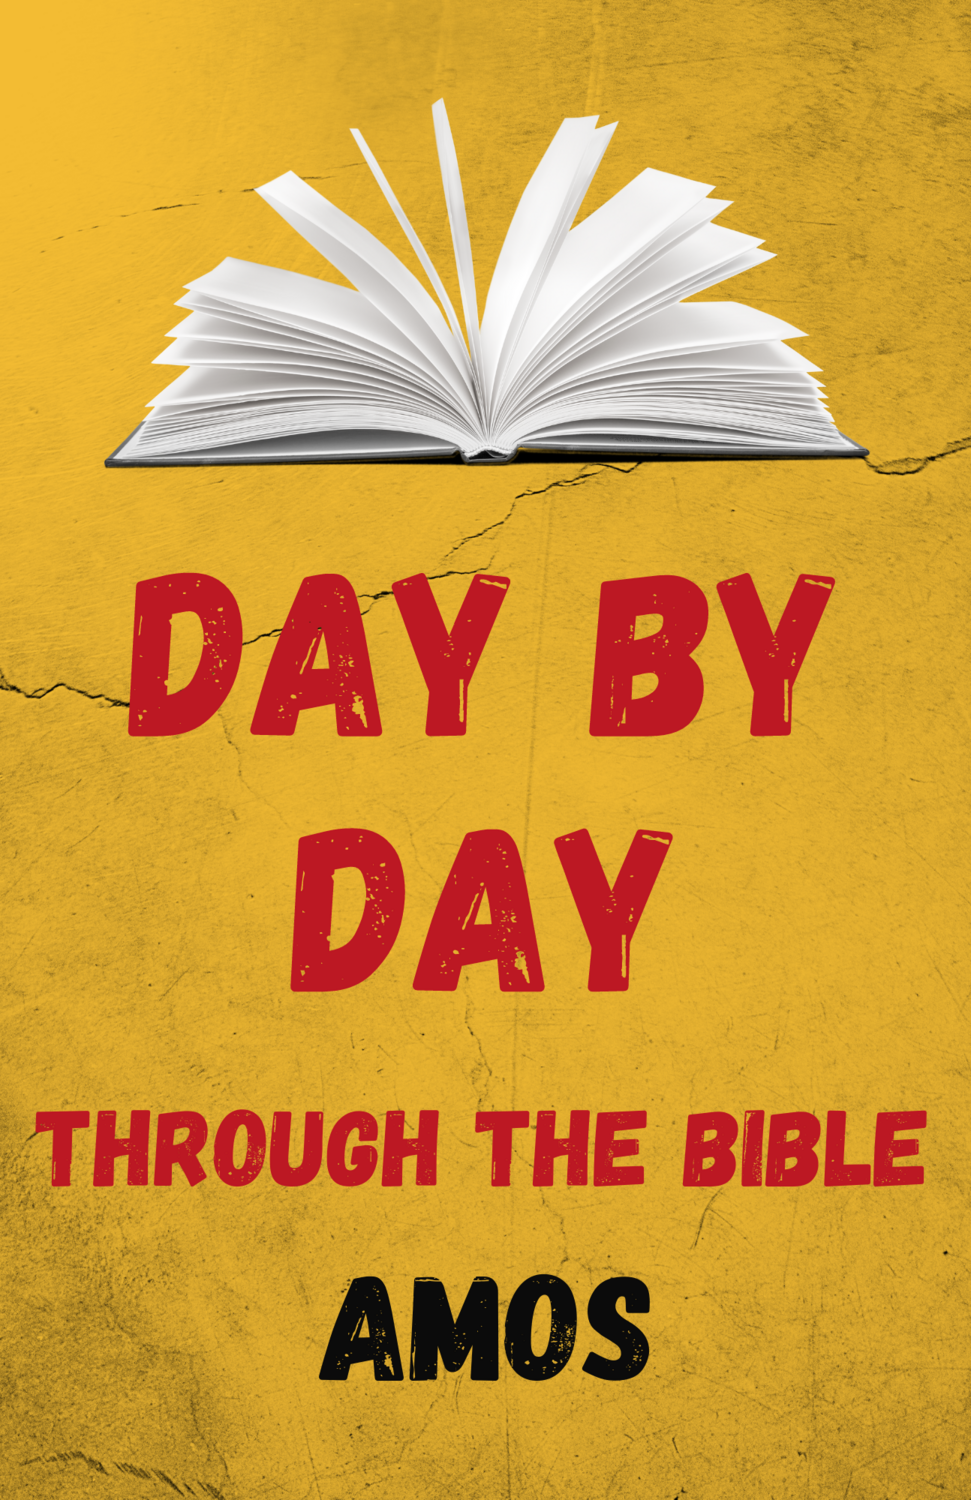 Day by Day Through the Bible: Nine Days in Amos - Digital Download